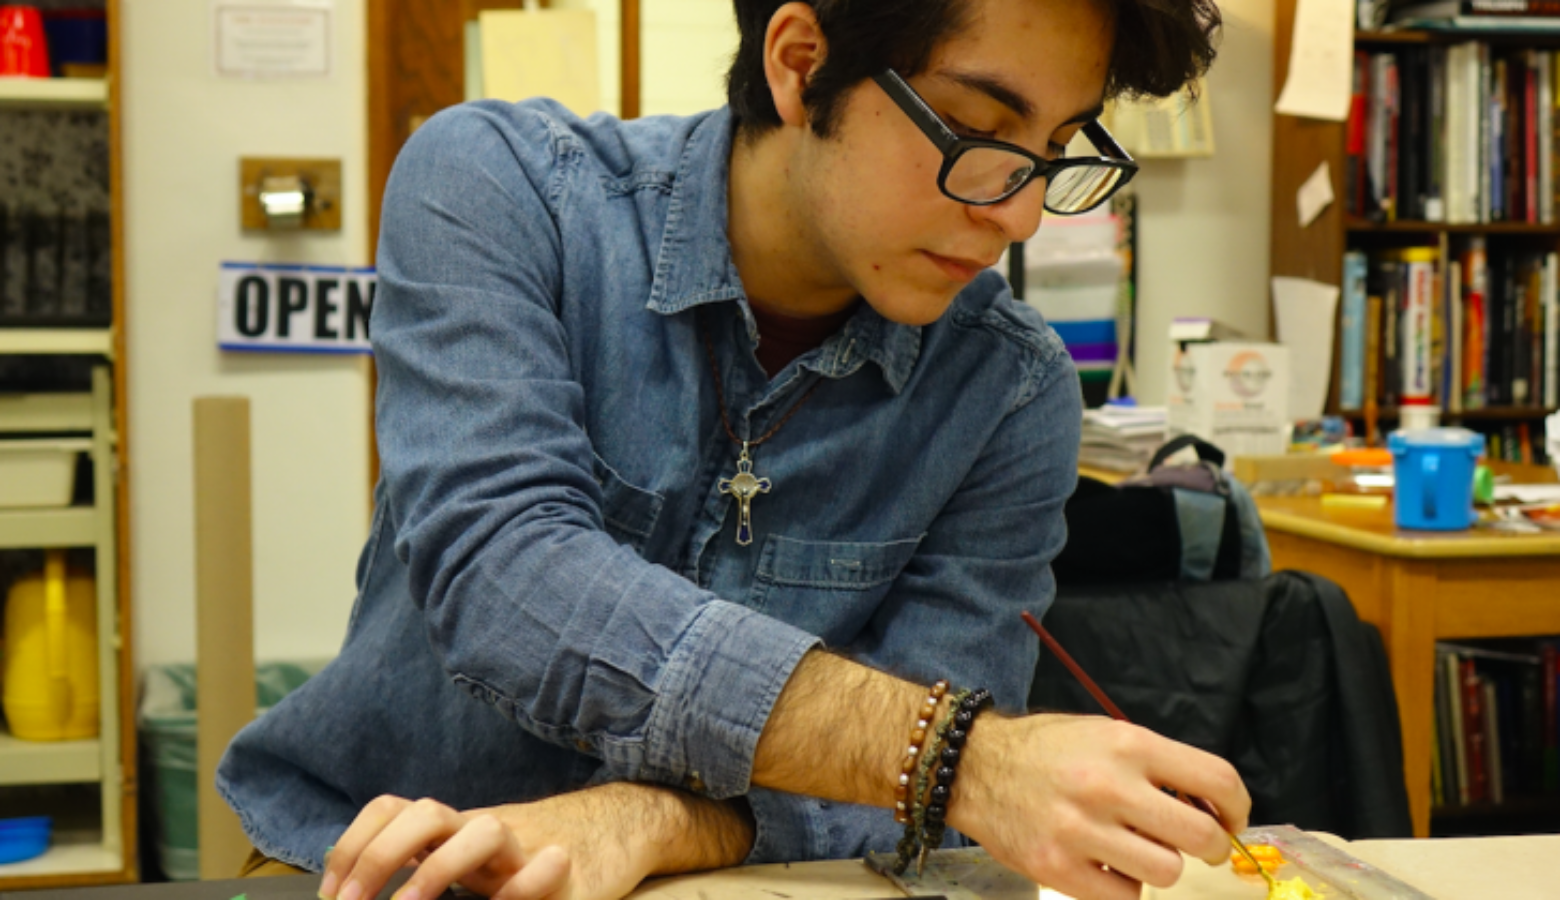 Senior Gustavo Flores works on a series of paintings in the art room at Shortridge High School in Indianapolis on Monday, Nov. 22, 2018.